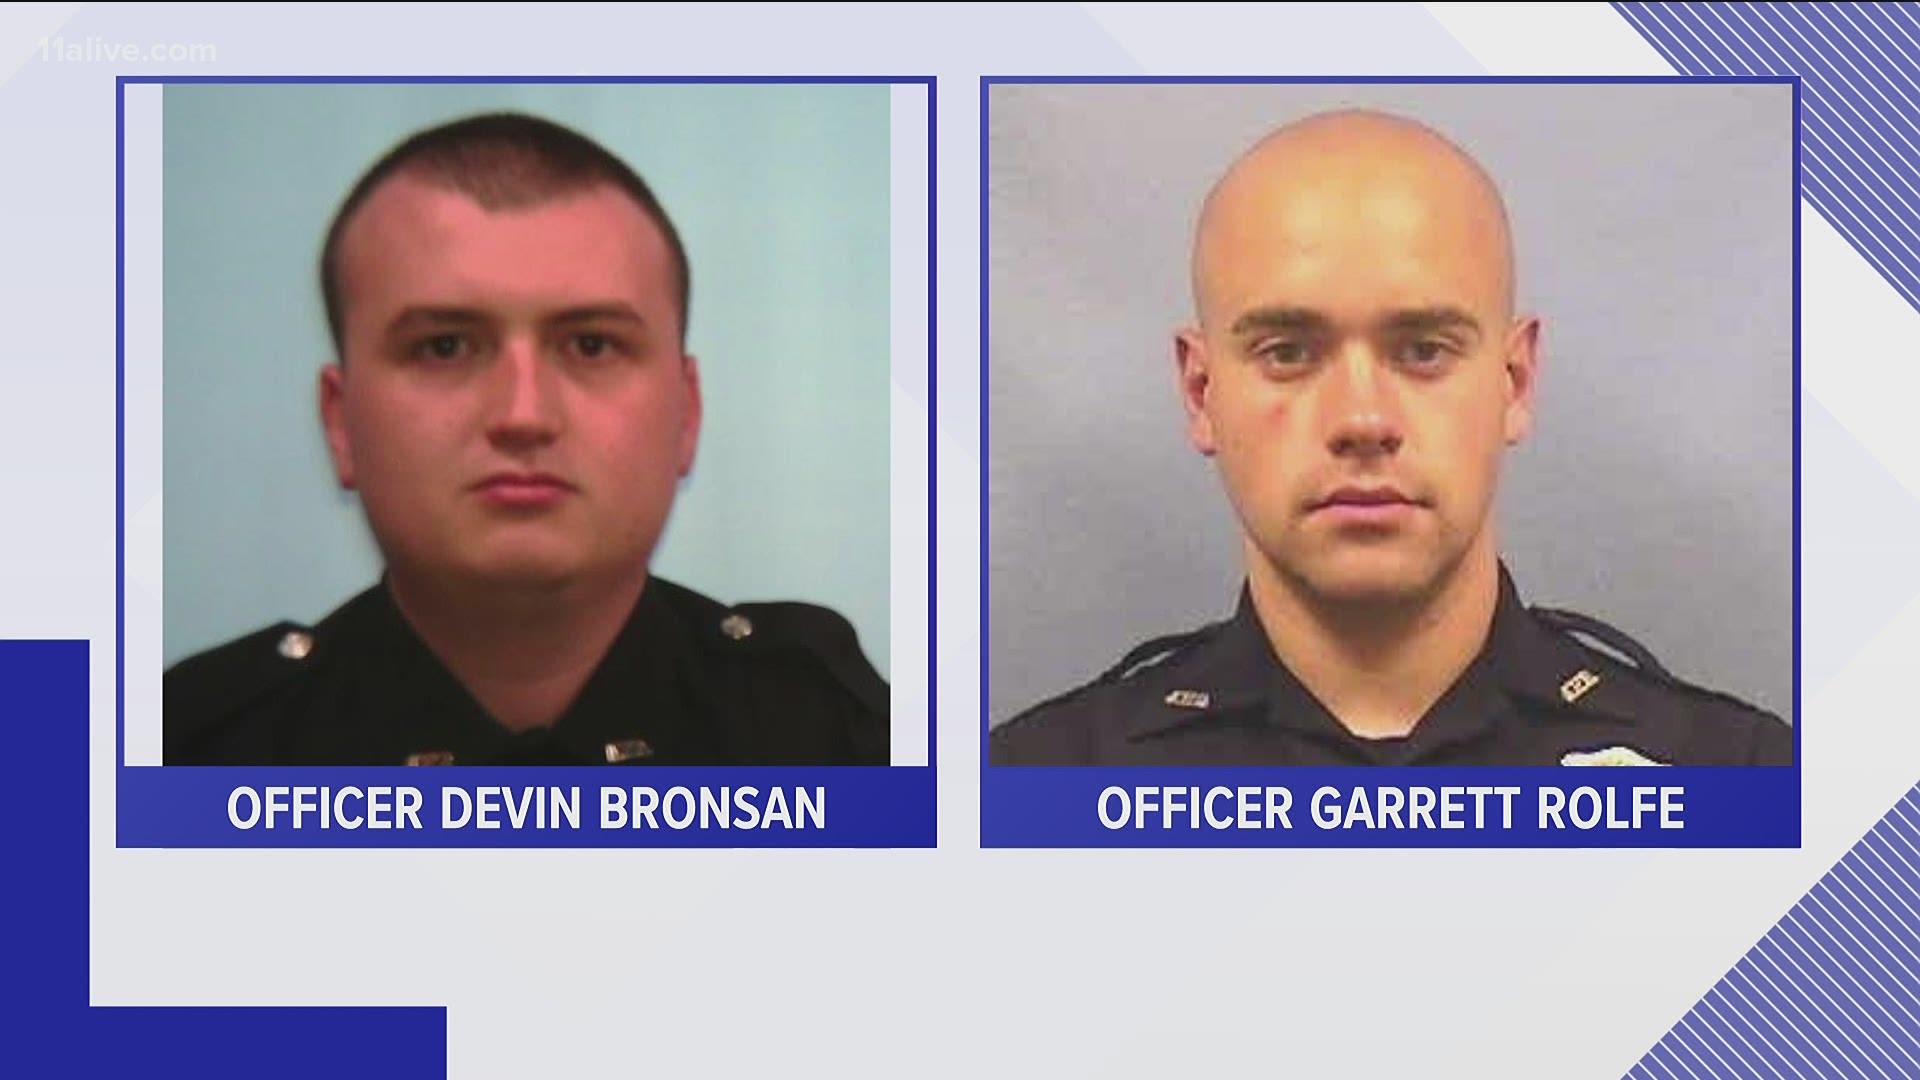 Officer Garrett Rolfe was terminated for his role in the incident and Officer Devin Bronsan was placed on administrative leave.